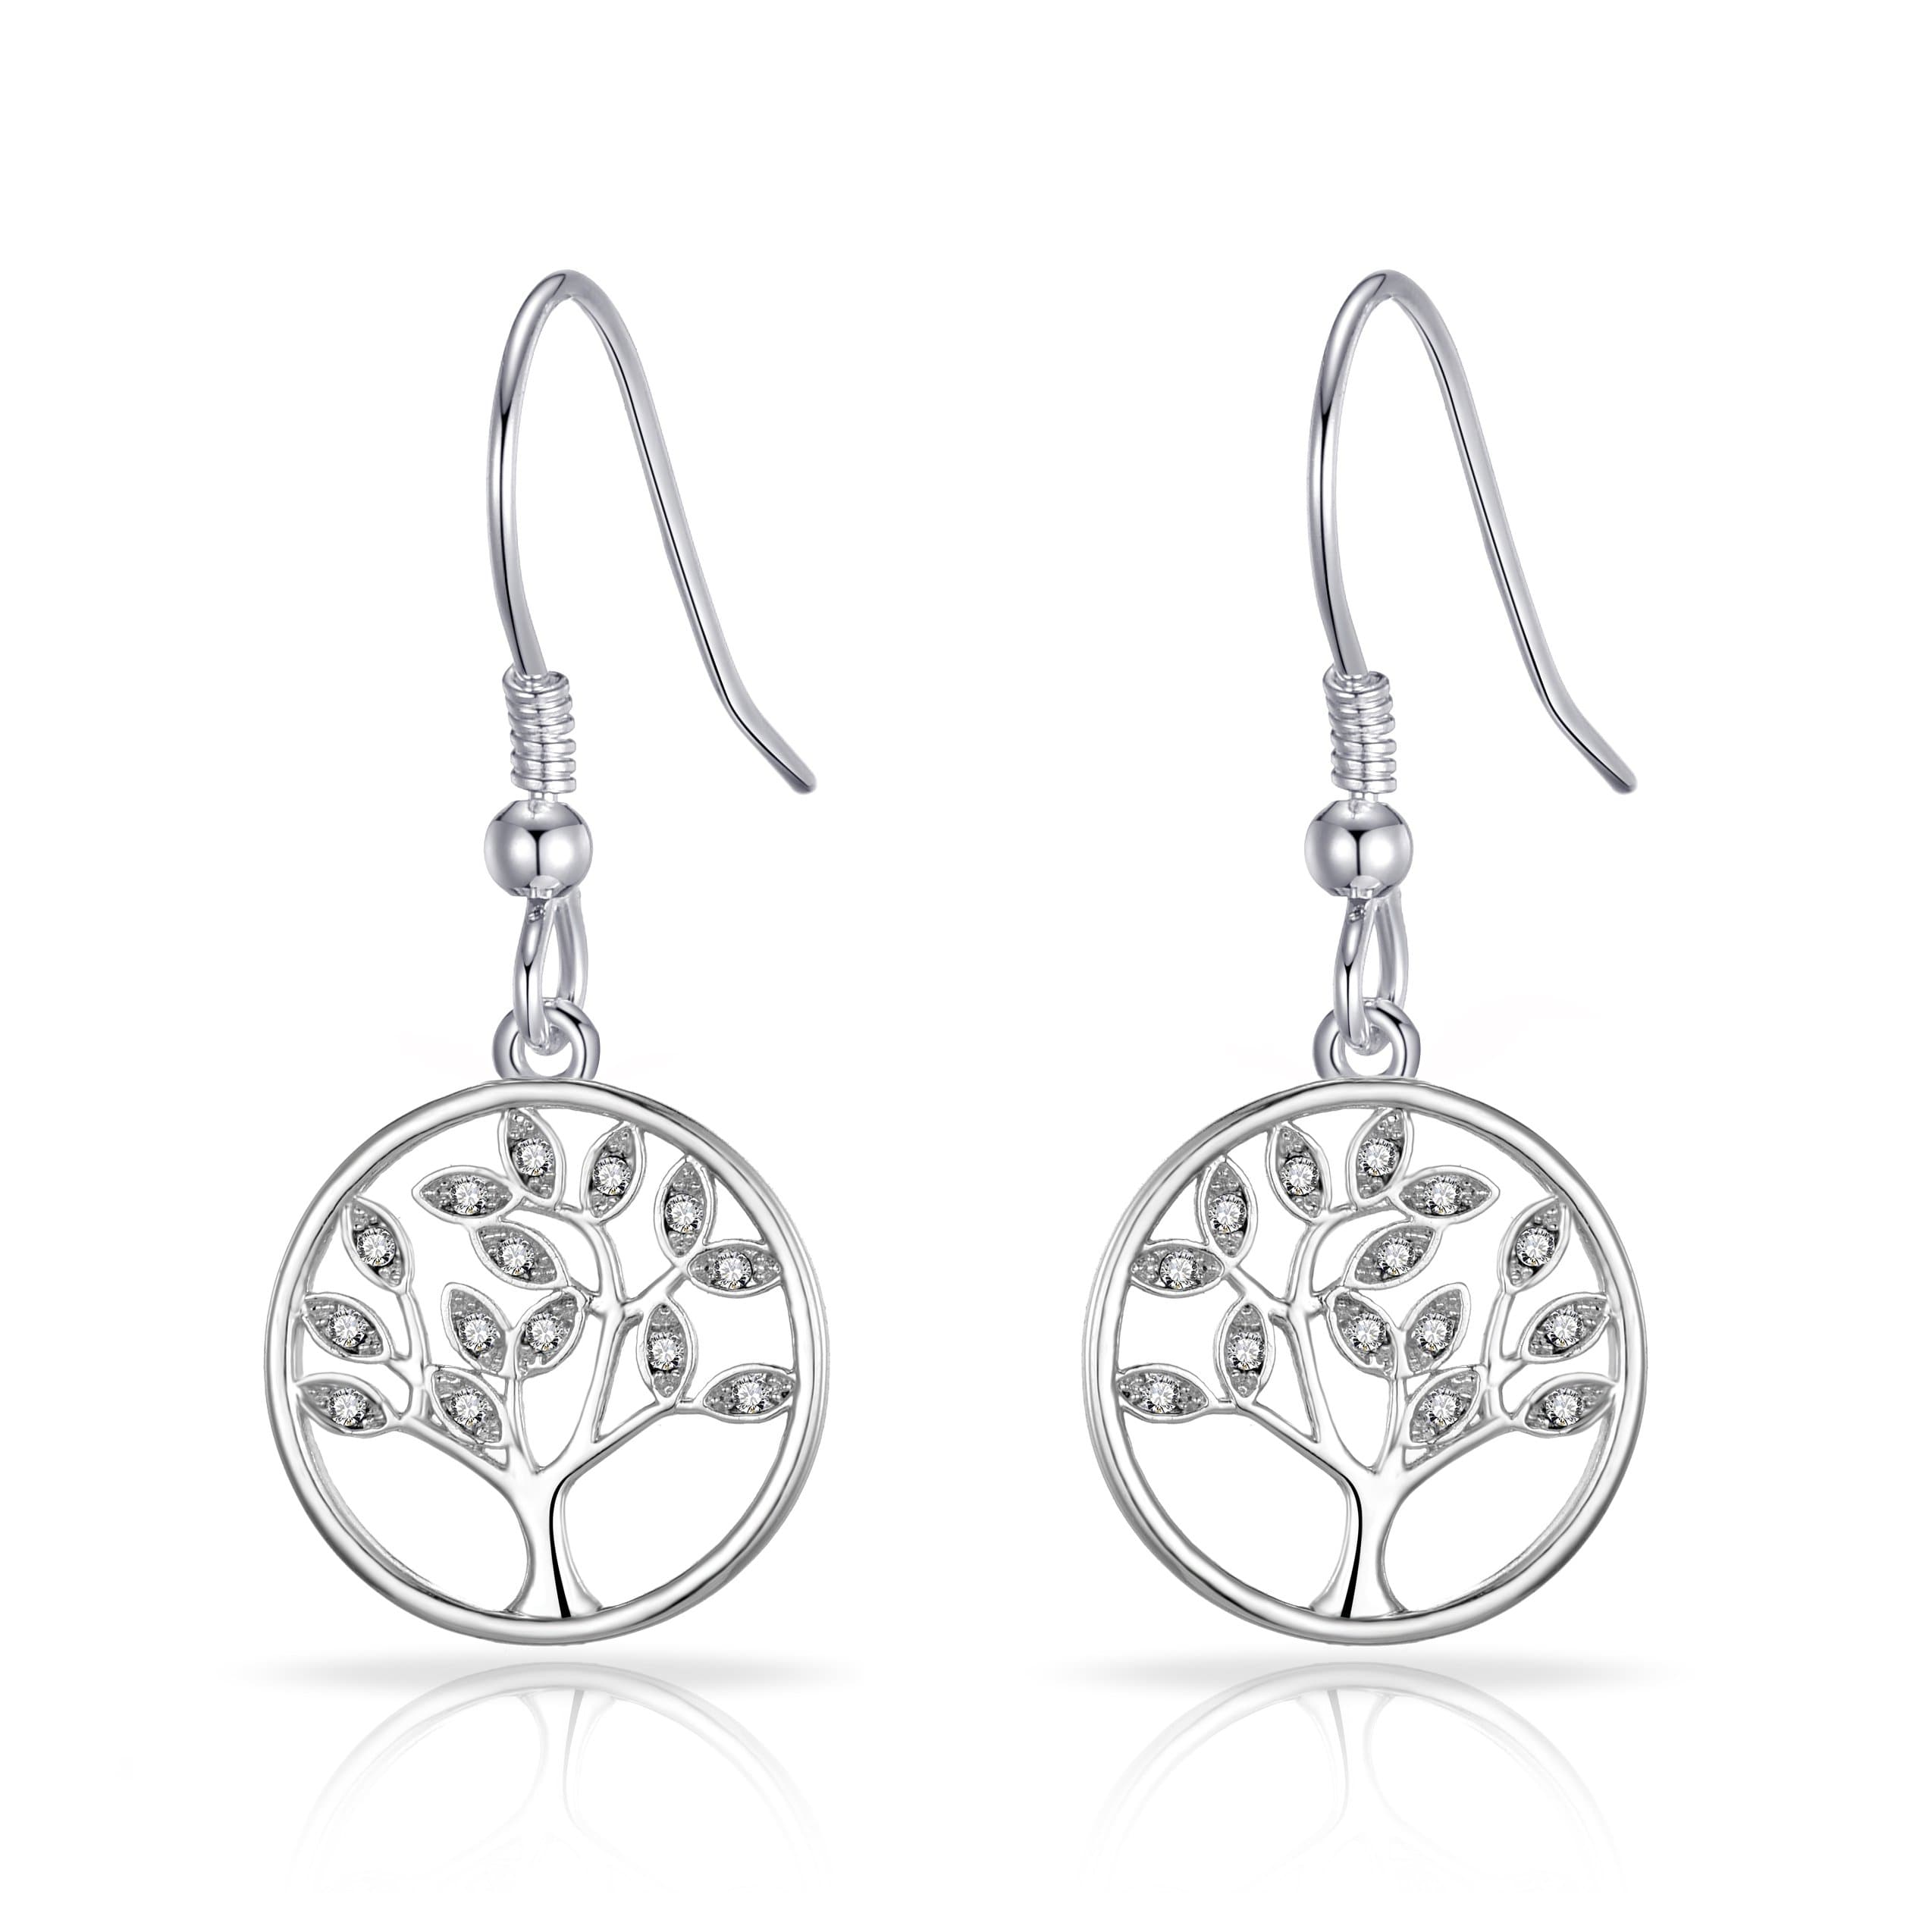 Silver Plated Tree of Life Drop Earrings Created with Crystals from Zircondia® by Philip Jones Jewellery